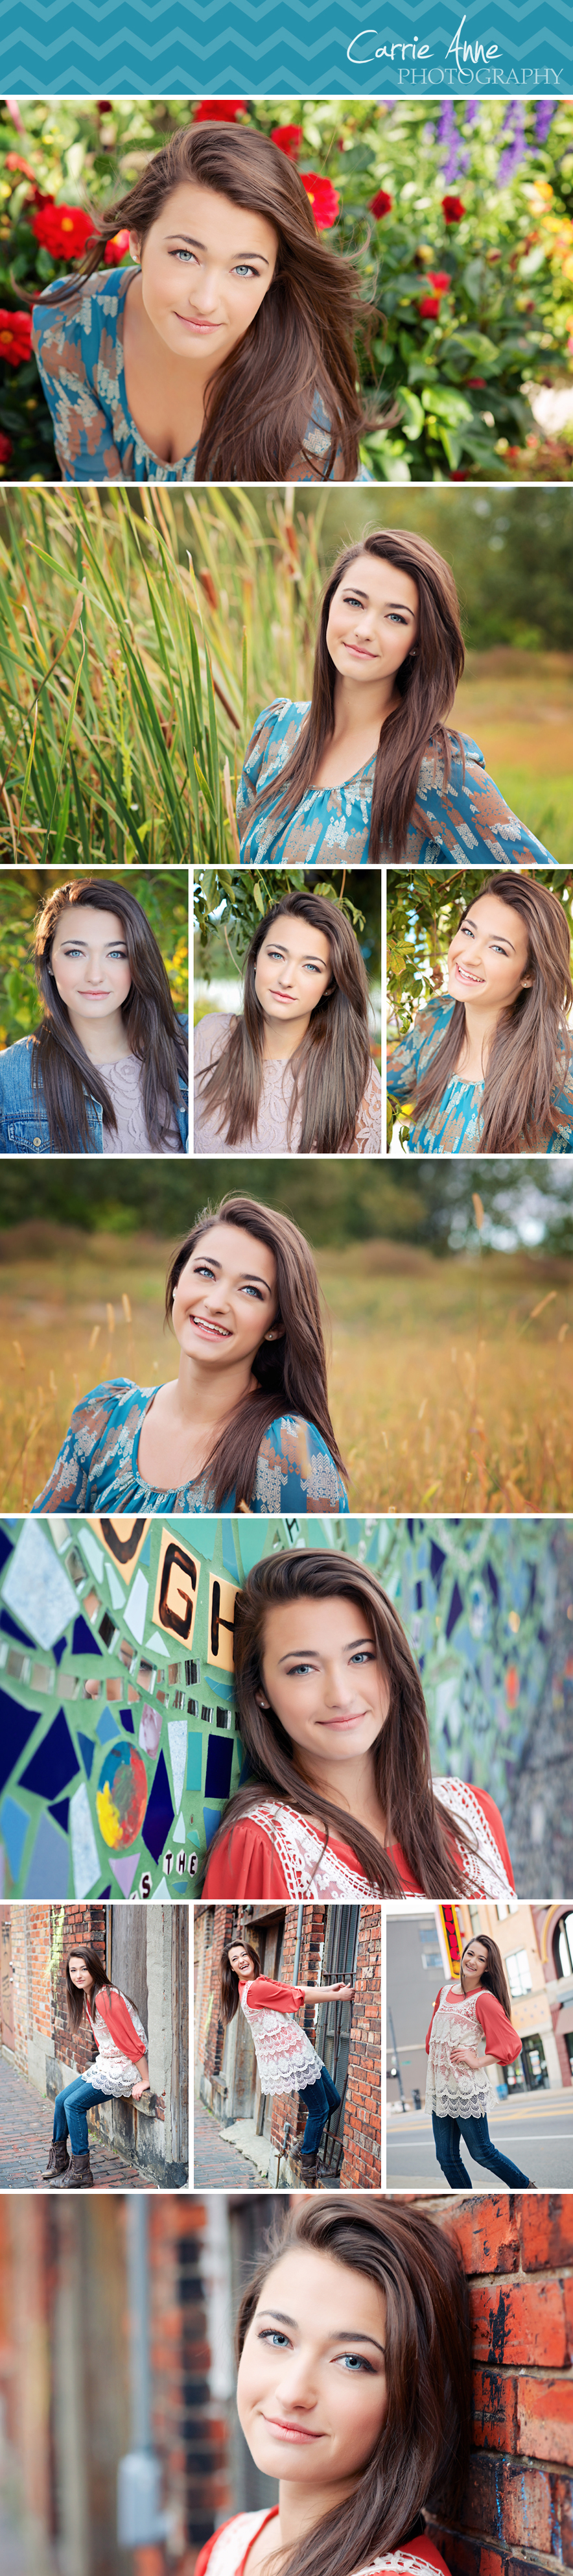 Colorful, Funky Senior Girl Photography Ultimate Senior Girl Session in Ada, Grand Rapids, Cascade, Michigan. Natural, bright, cheery, colorful, photography.